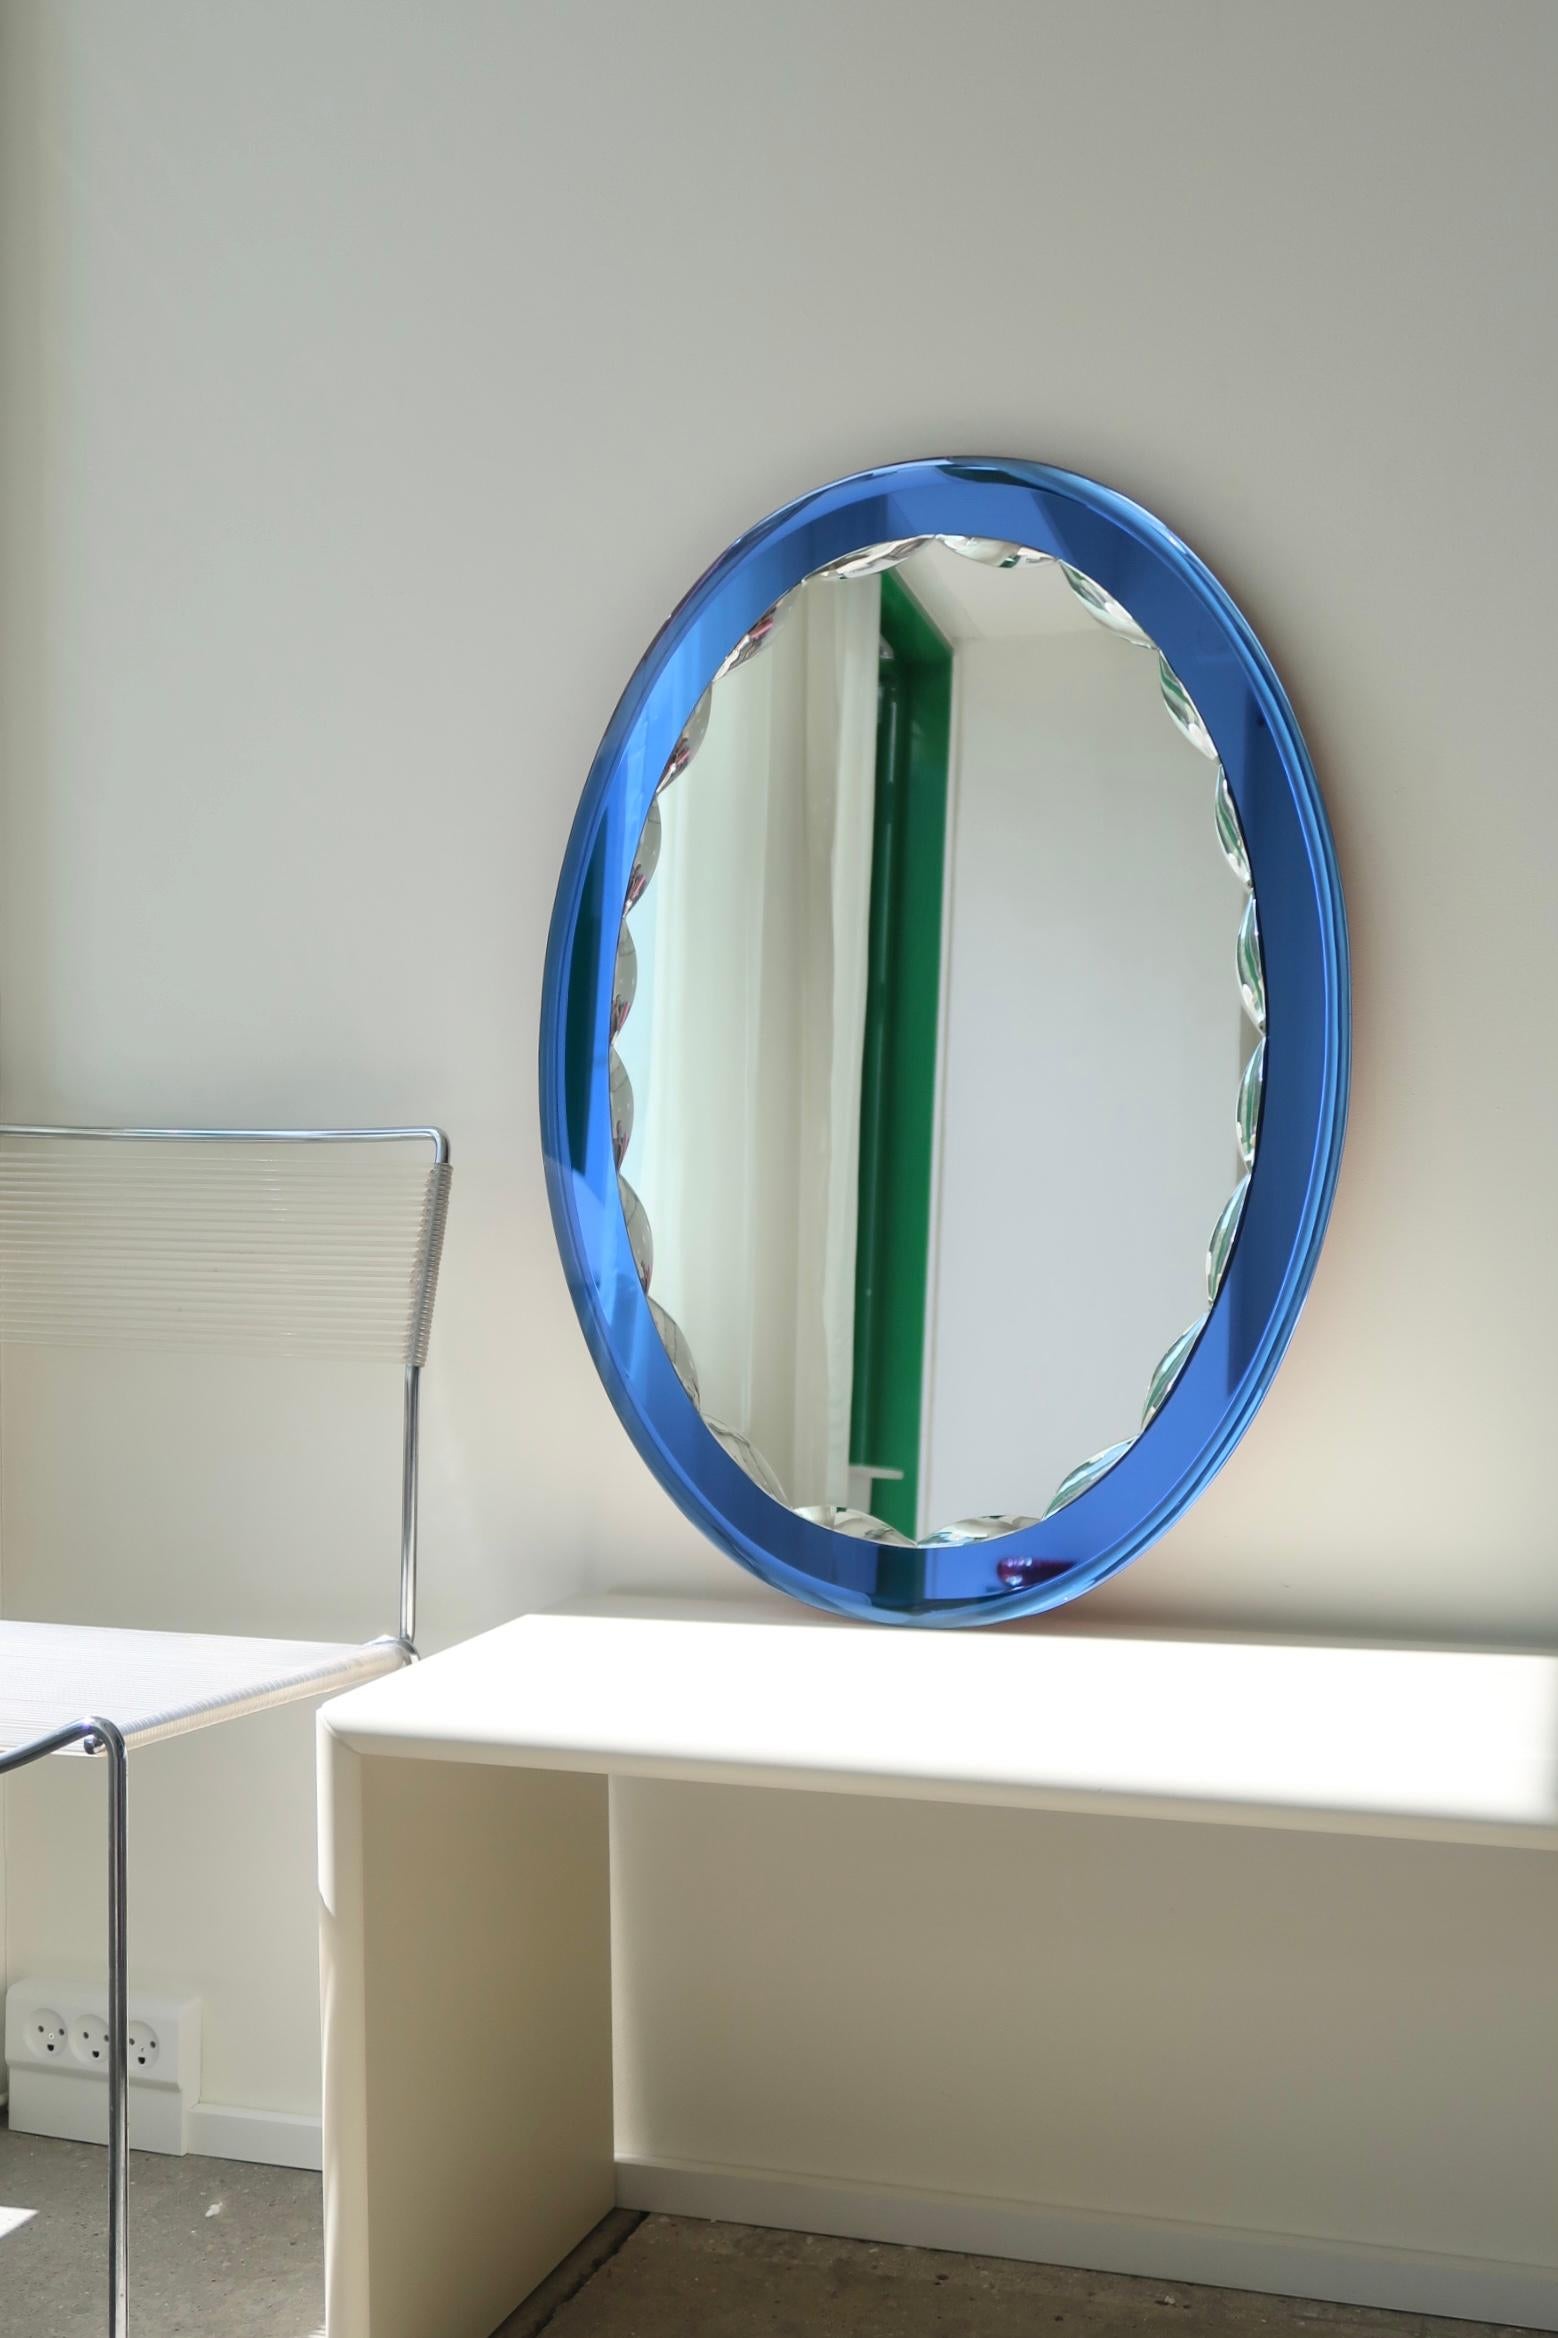 Large vintage Italian mirror in oval faceted glass with sapphire blue rim. Handmade in Italy, 1970s. The glass appears without chips/damage with minimal traces of use. 
Measures 57.5x81 cm.

